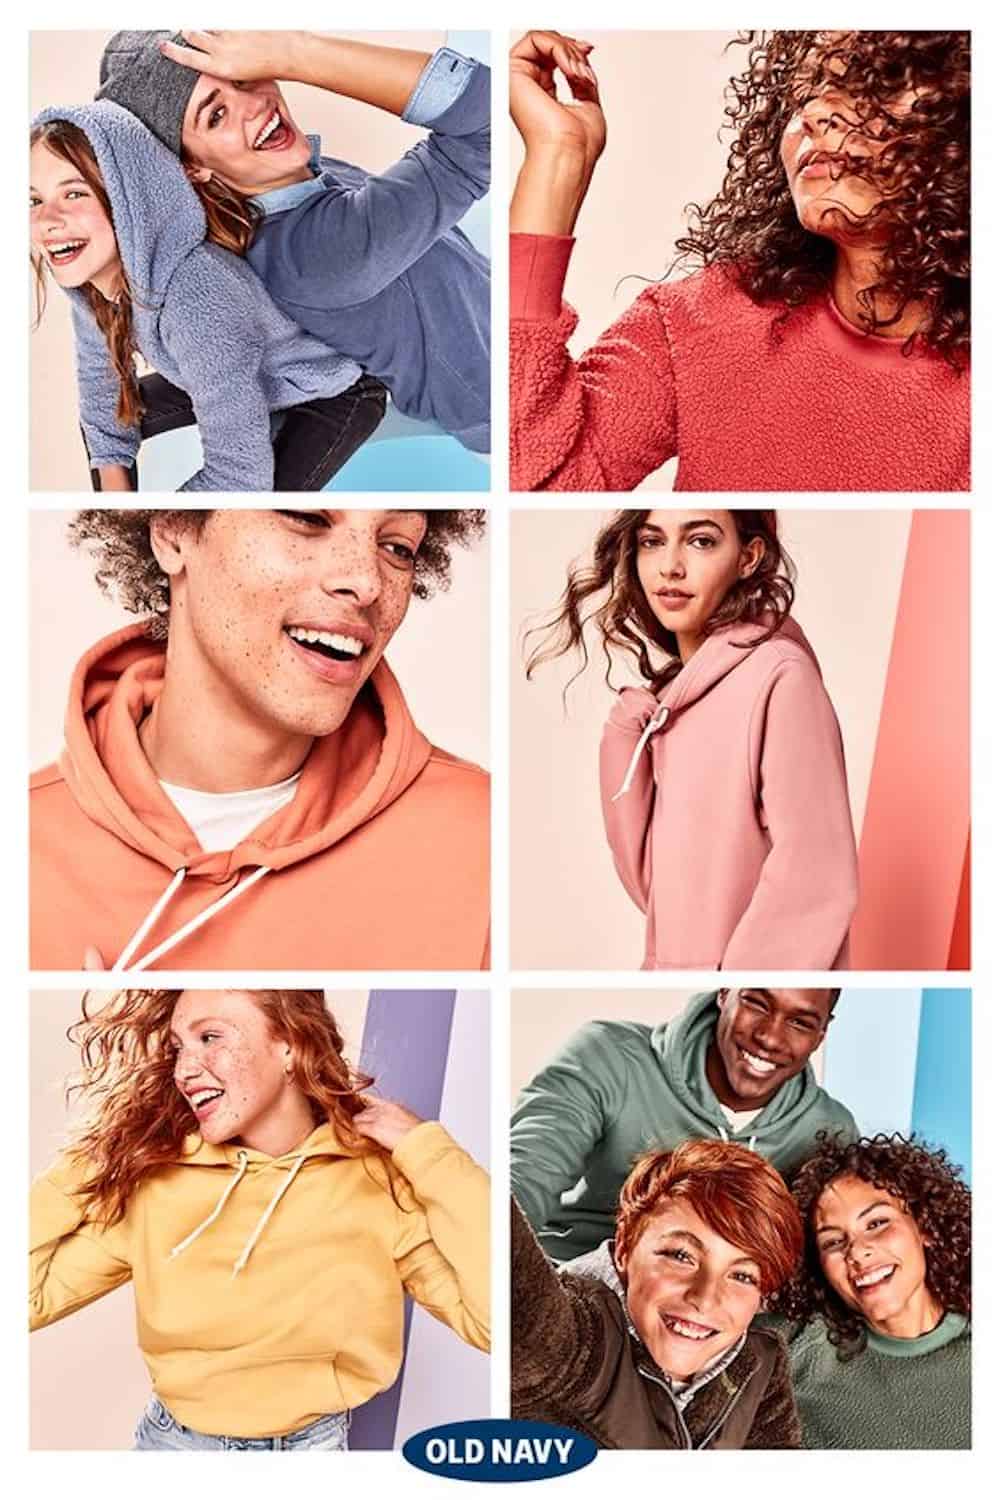 collage of images of young teens and adults wearing brightly colored clothing from Old Navy